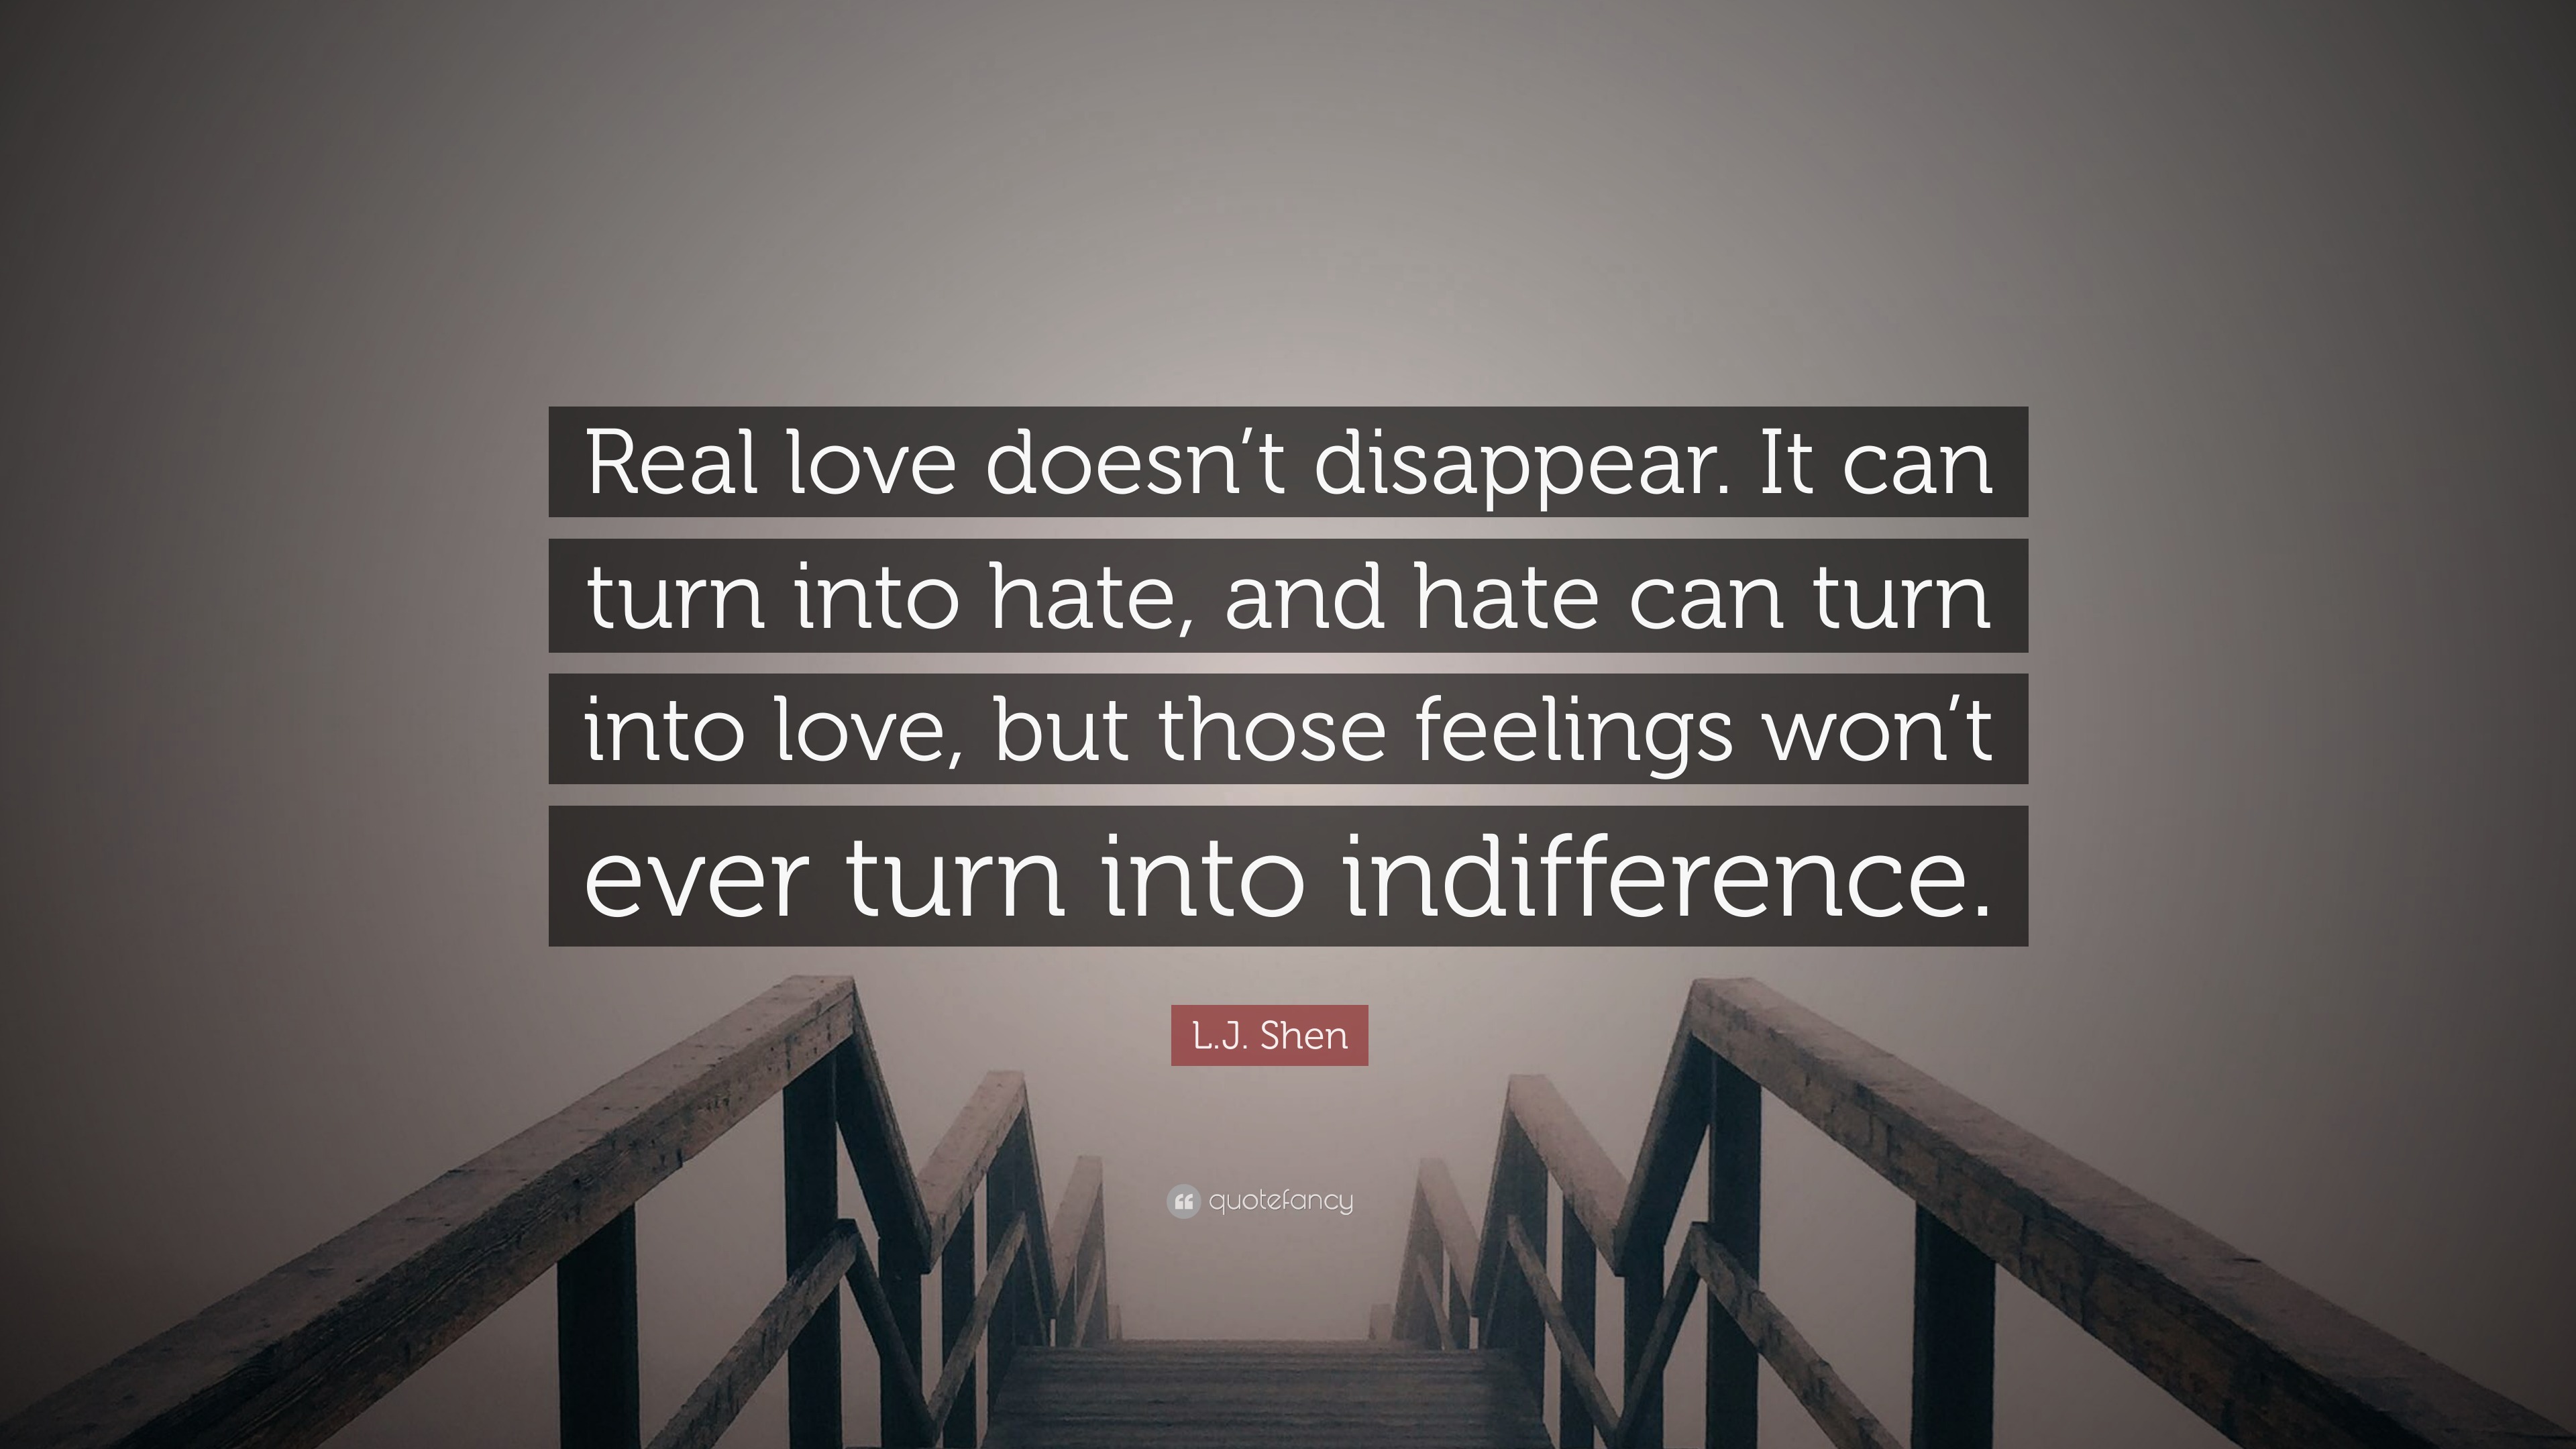 L.J. Shen Quote: “Real love doesn't disappear. It can turn into